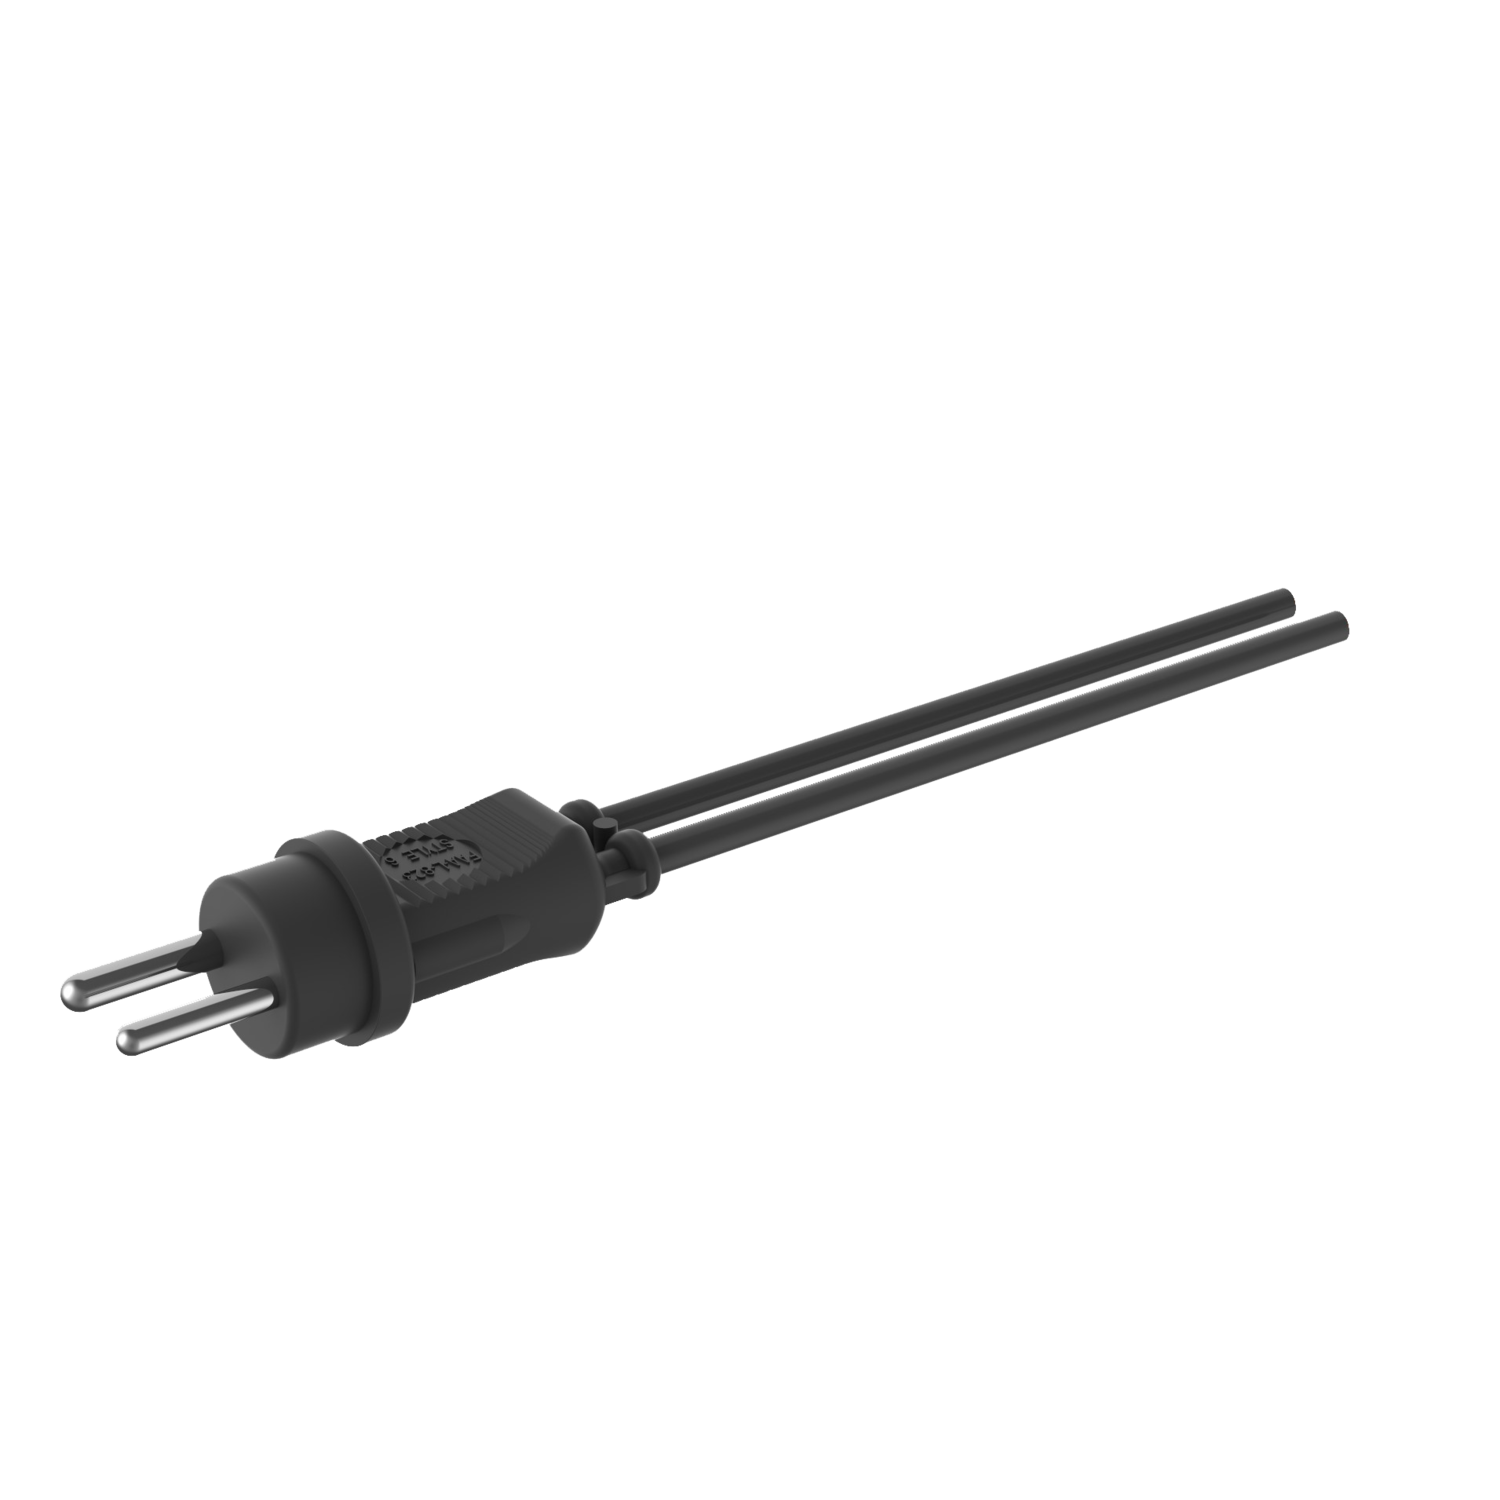 Prefabricated Secondary Leads and Extension Cords - KDC506S